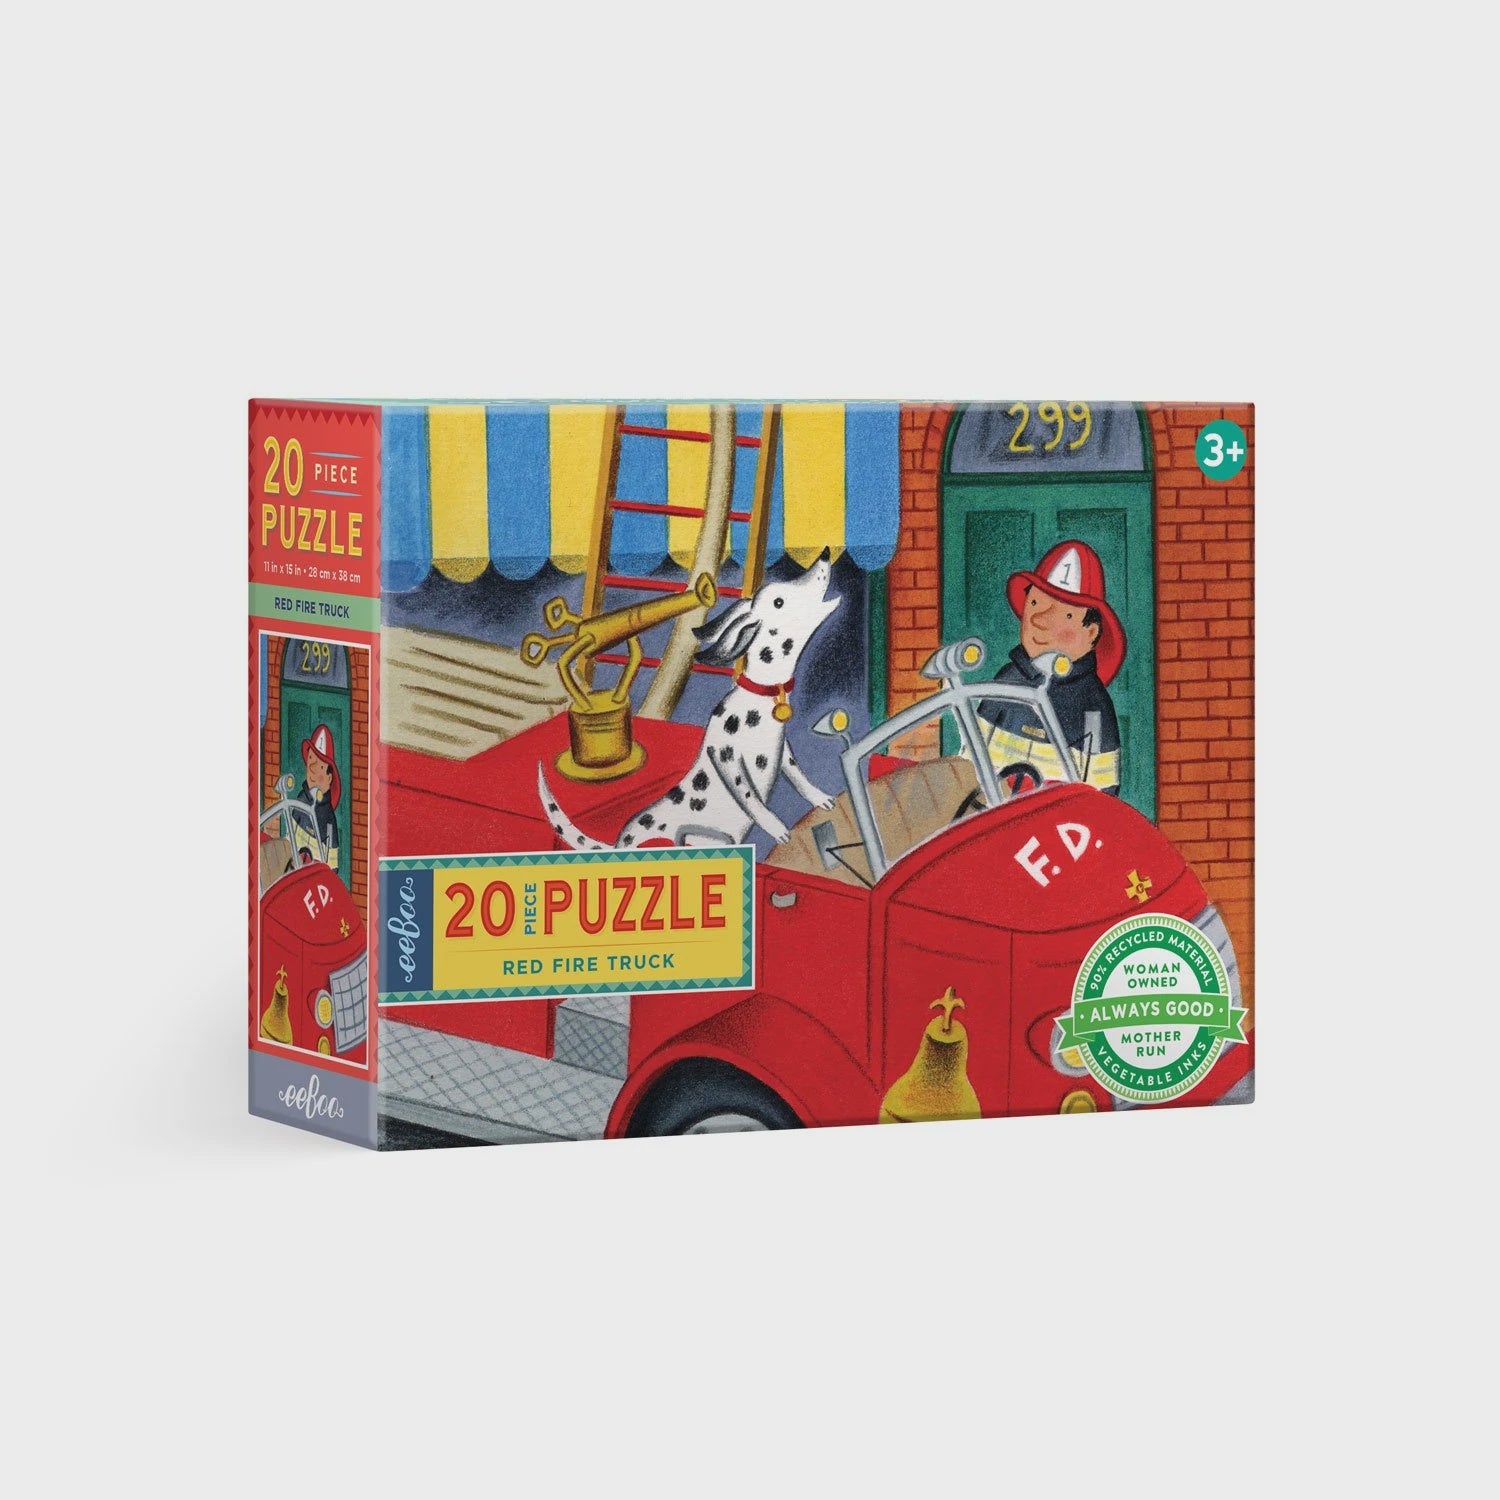 20 Piece Big Puzzle - Red Fire Truck